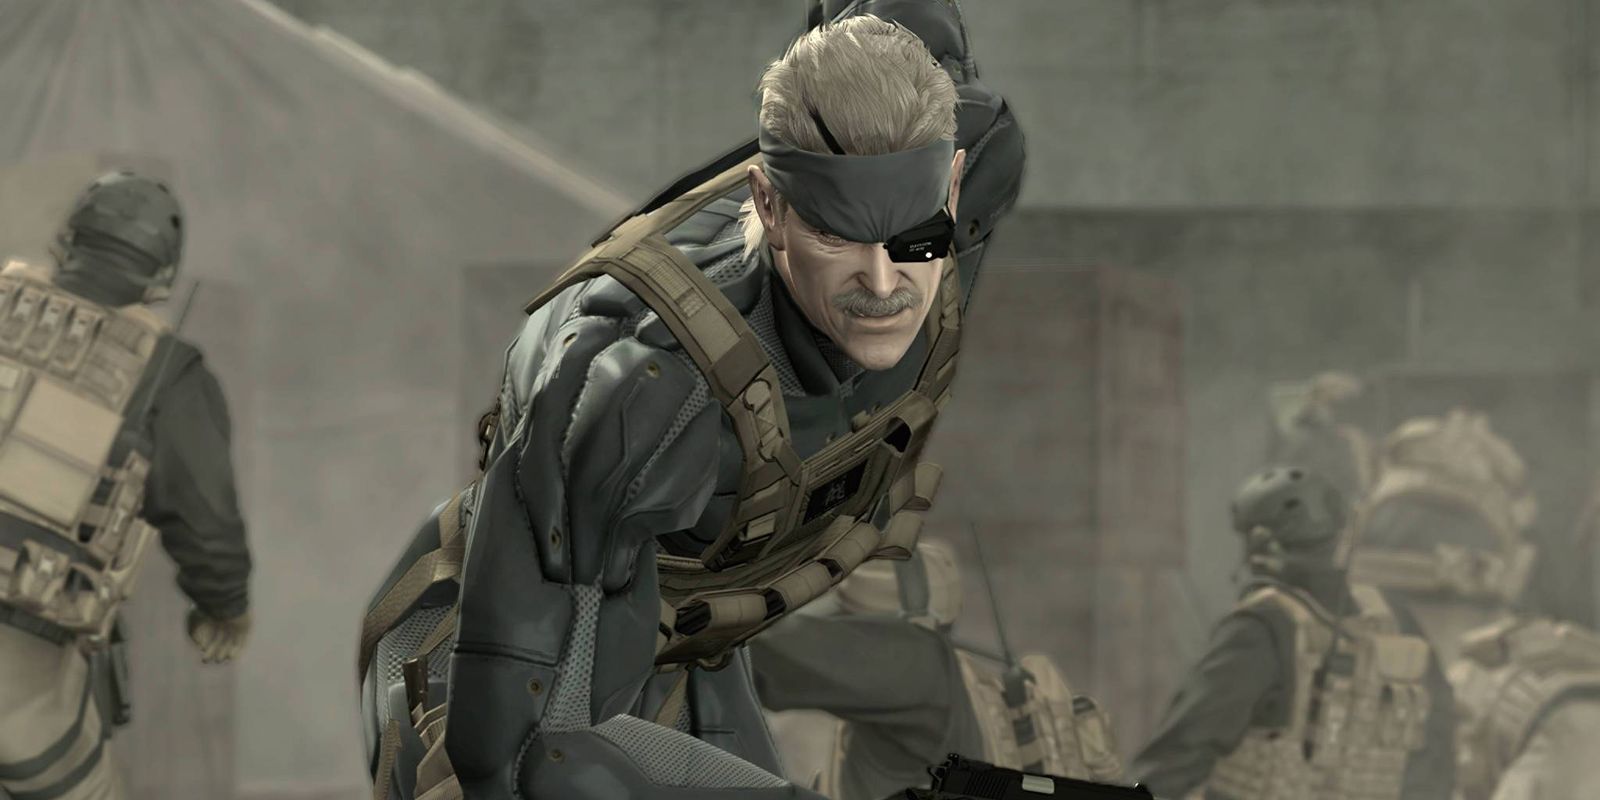 Metal Gear Solid 4 - Snake In The Middle Of Combat